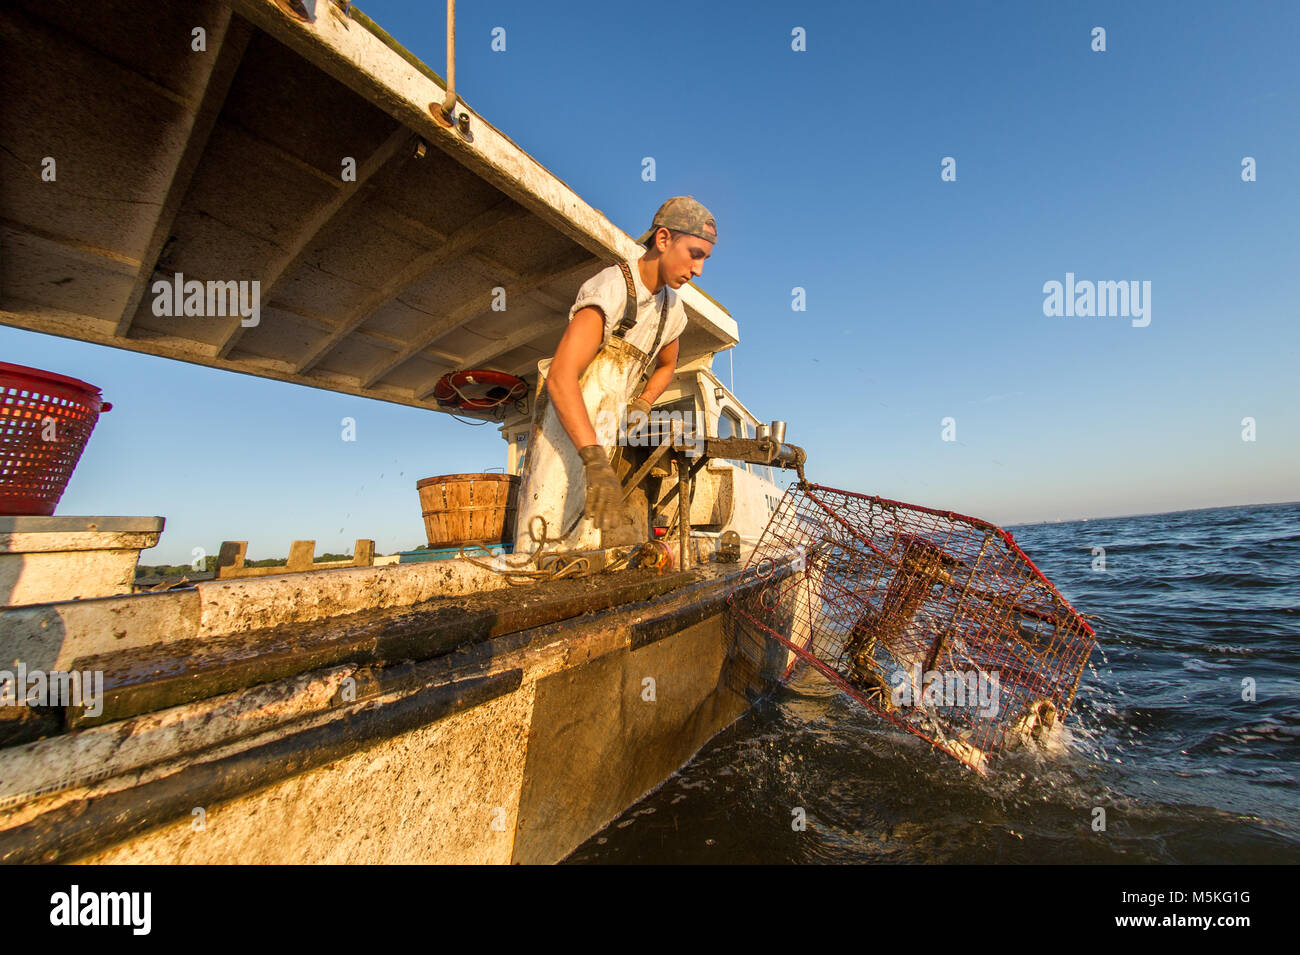 Young waterman throw baited crab trap off of boat and into the waters of the Chesapeake Bay, Dundalk, Maryland. Stock Photo